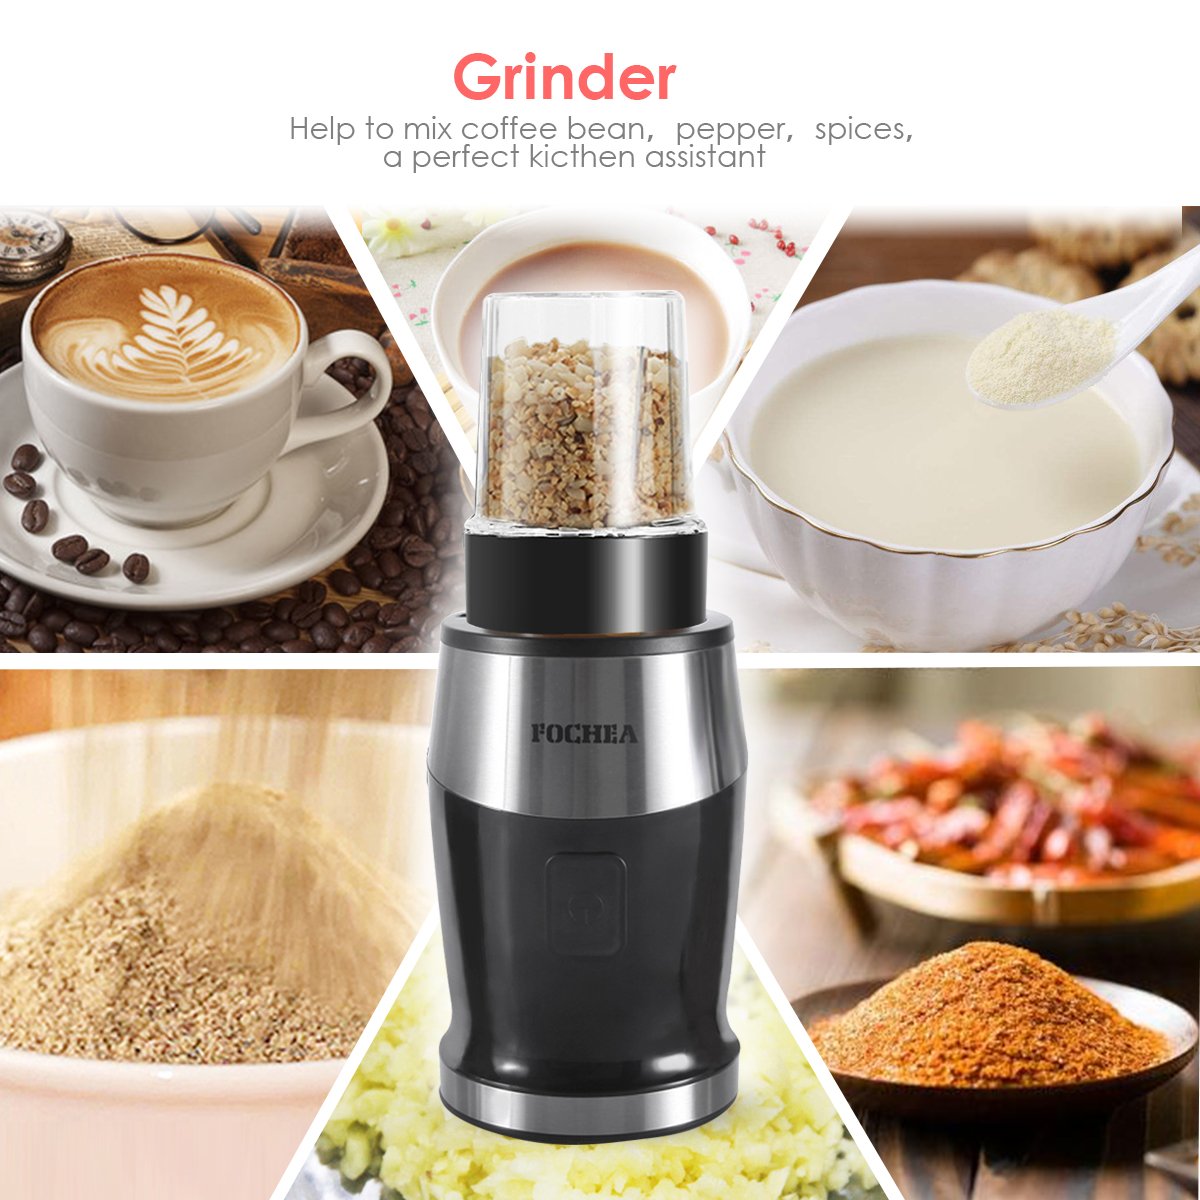 Fochea Blender with different ingredients